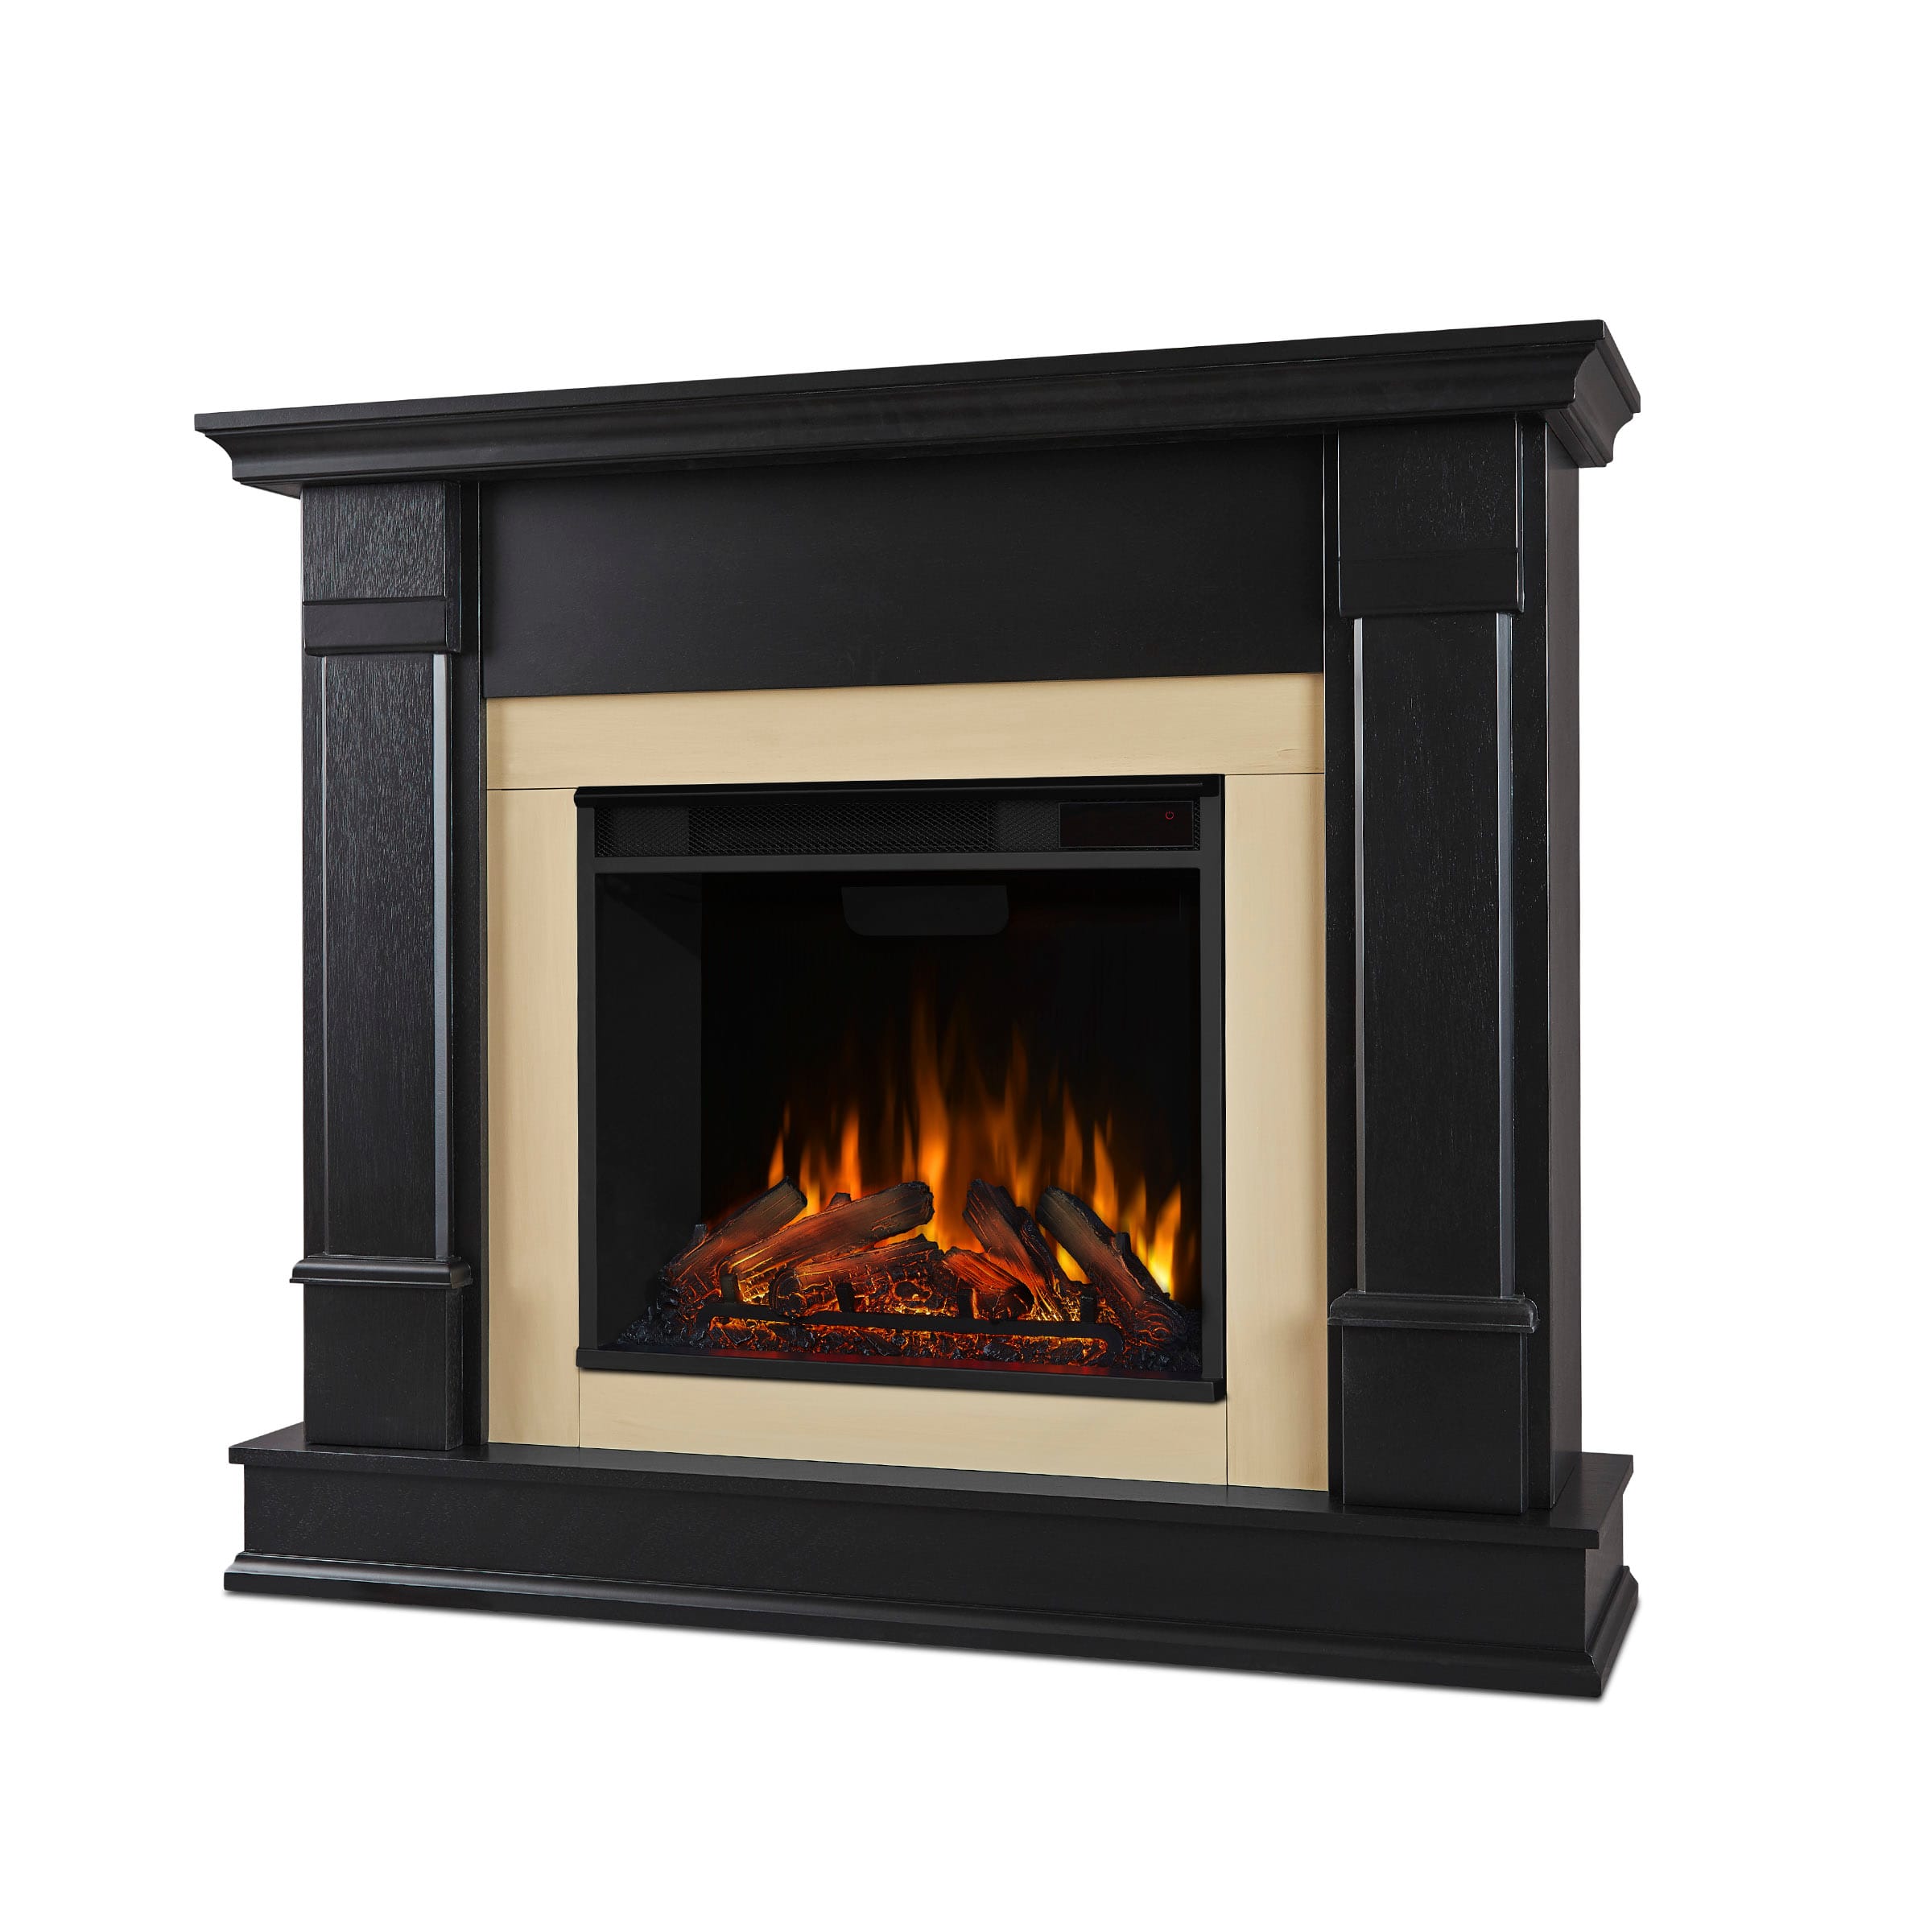 Real Flame Silverton Electric Fireplace Black, Do Electric Fireplaces Have A Real Flame